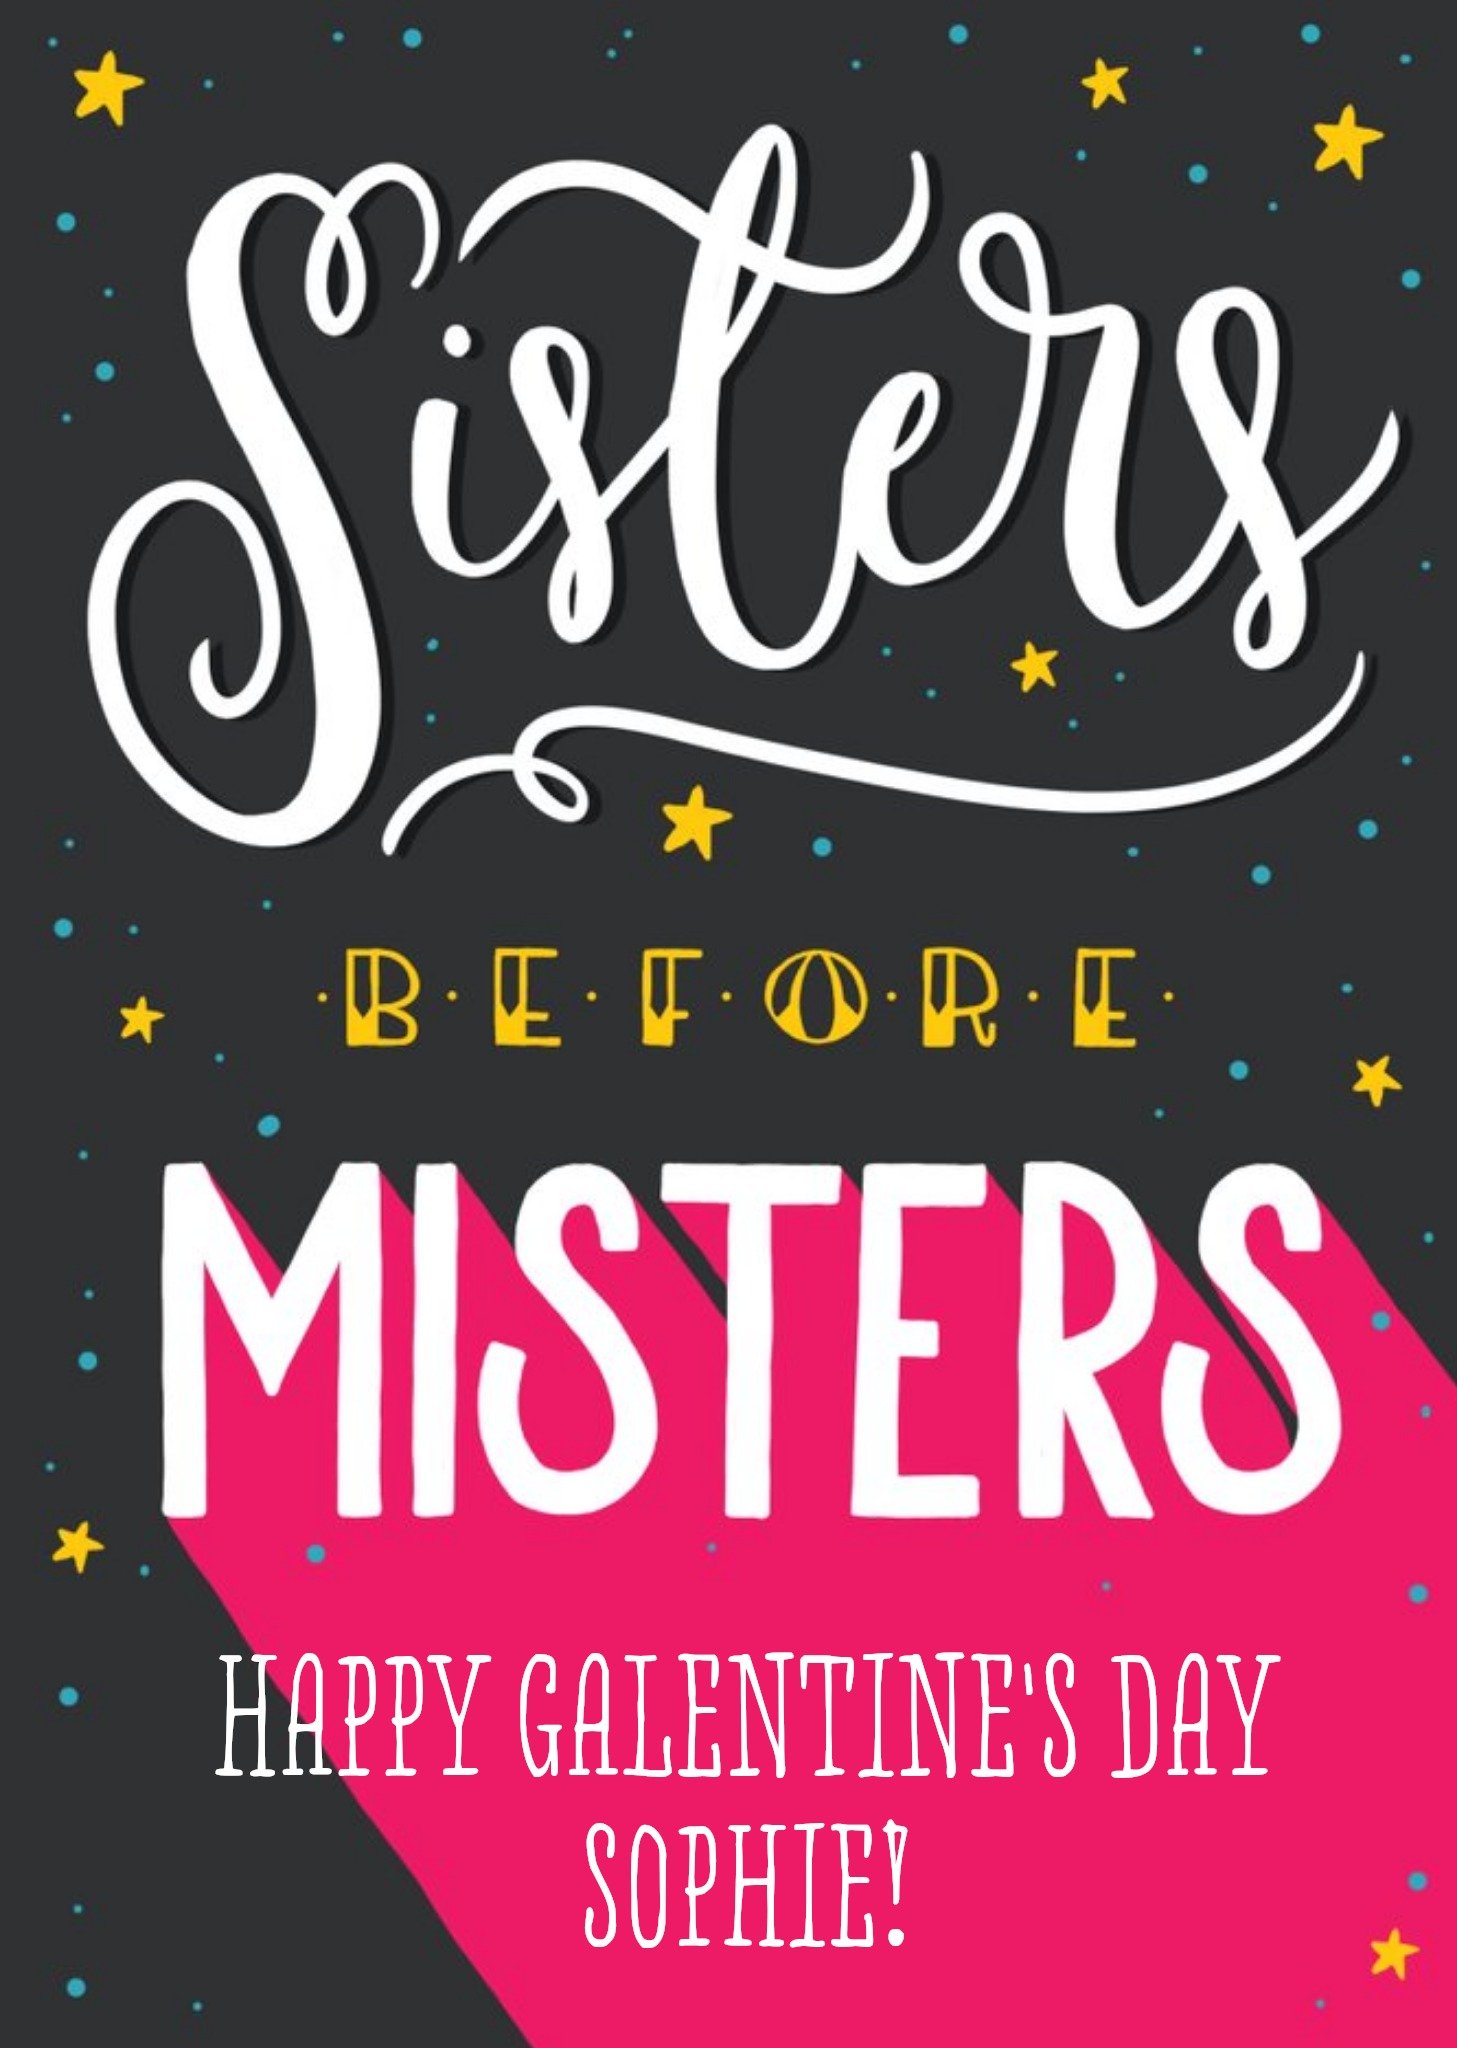 Moonpig Sisters Before Misters Personalised Happy Galentine's Day Card, Large